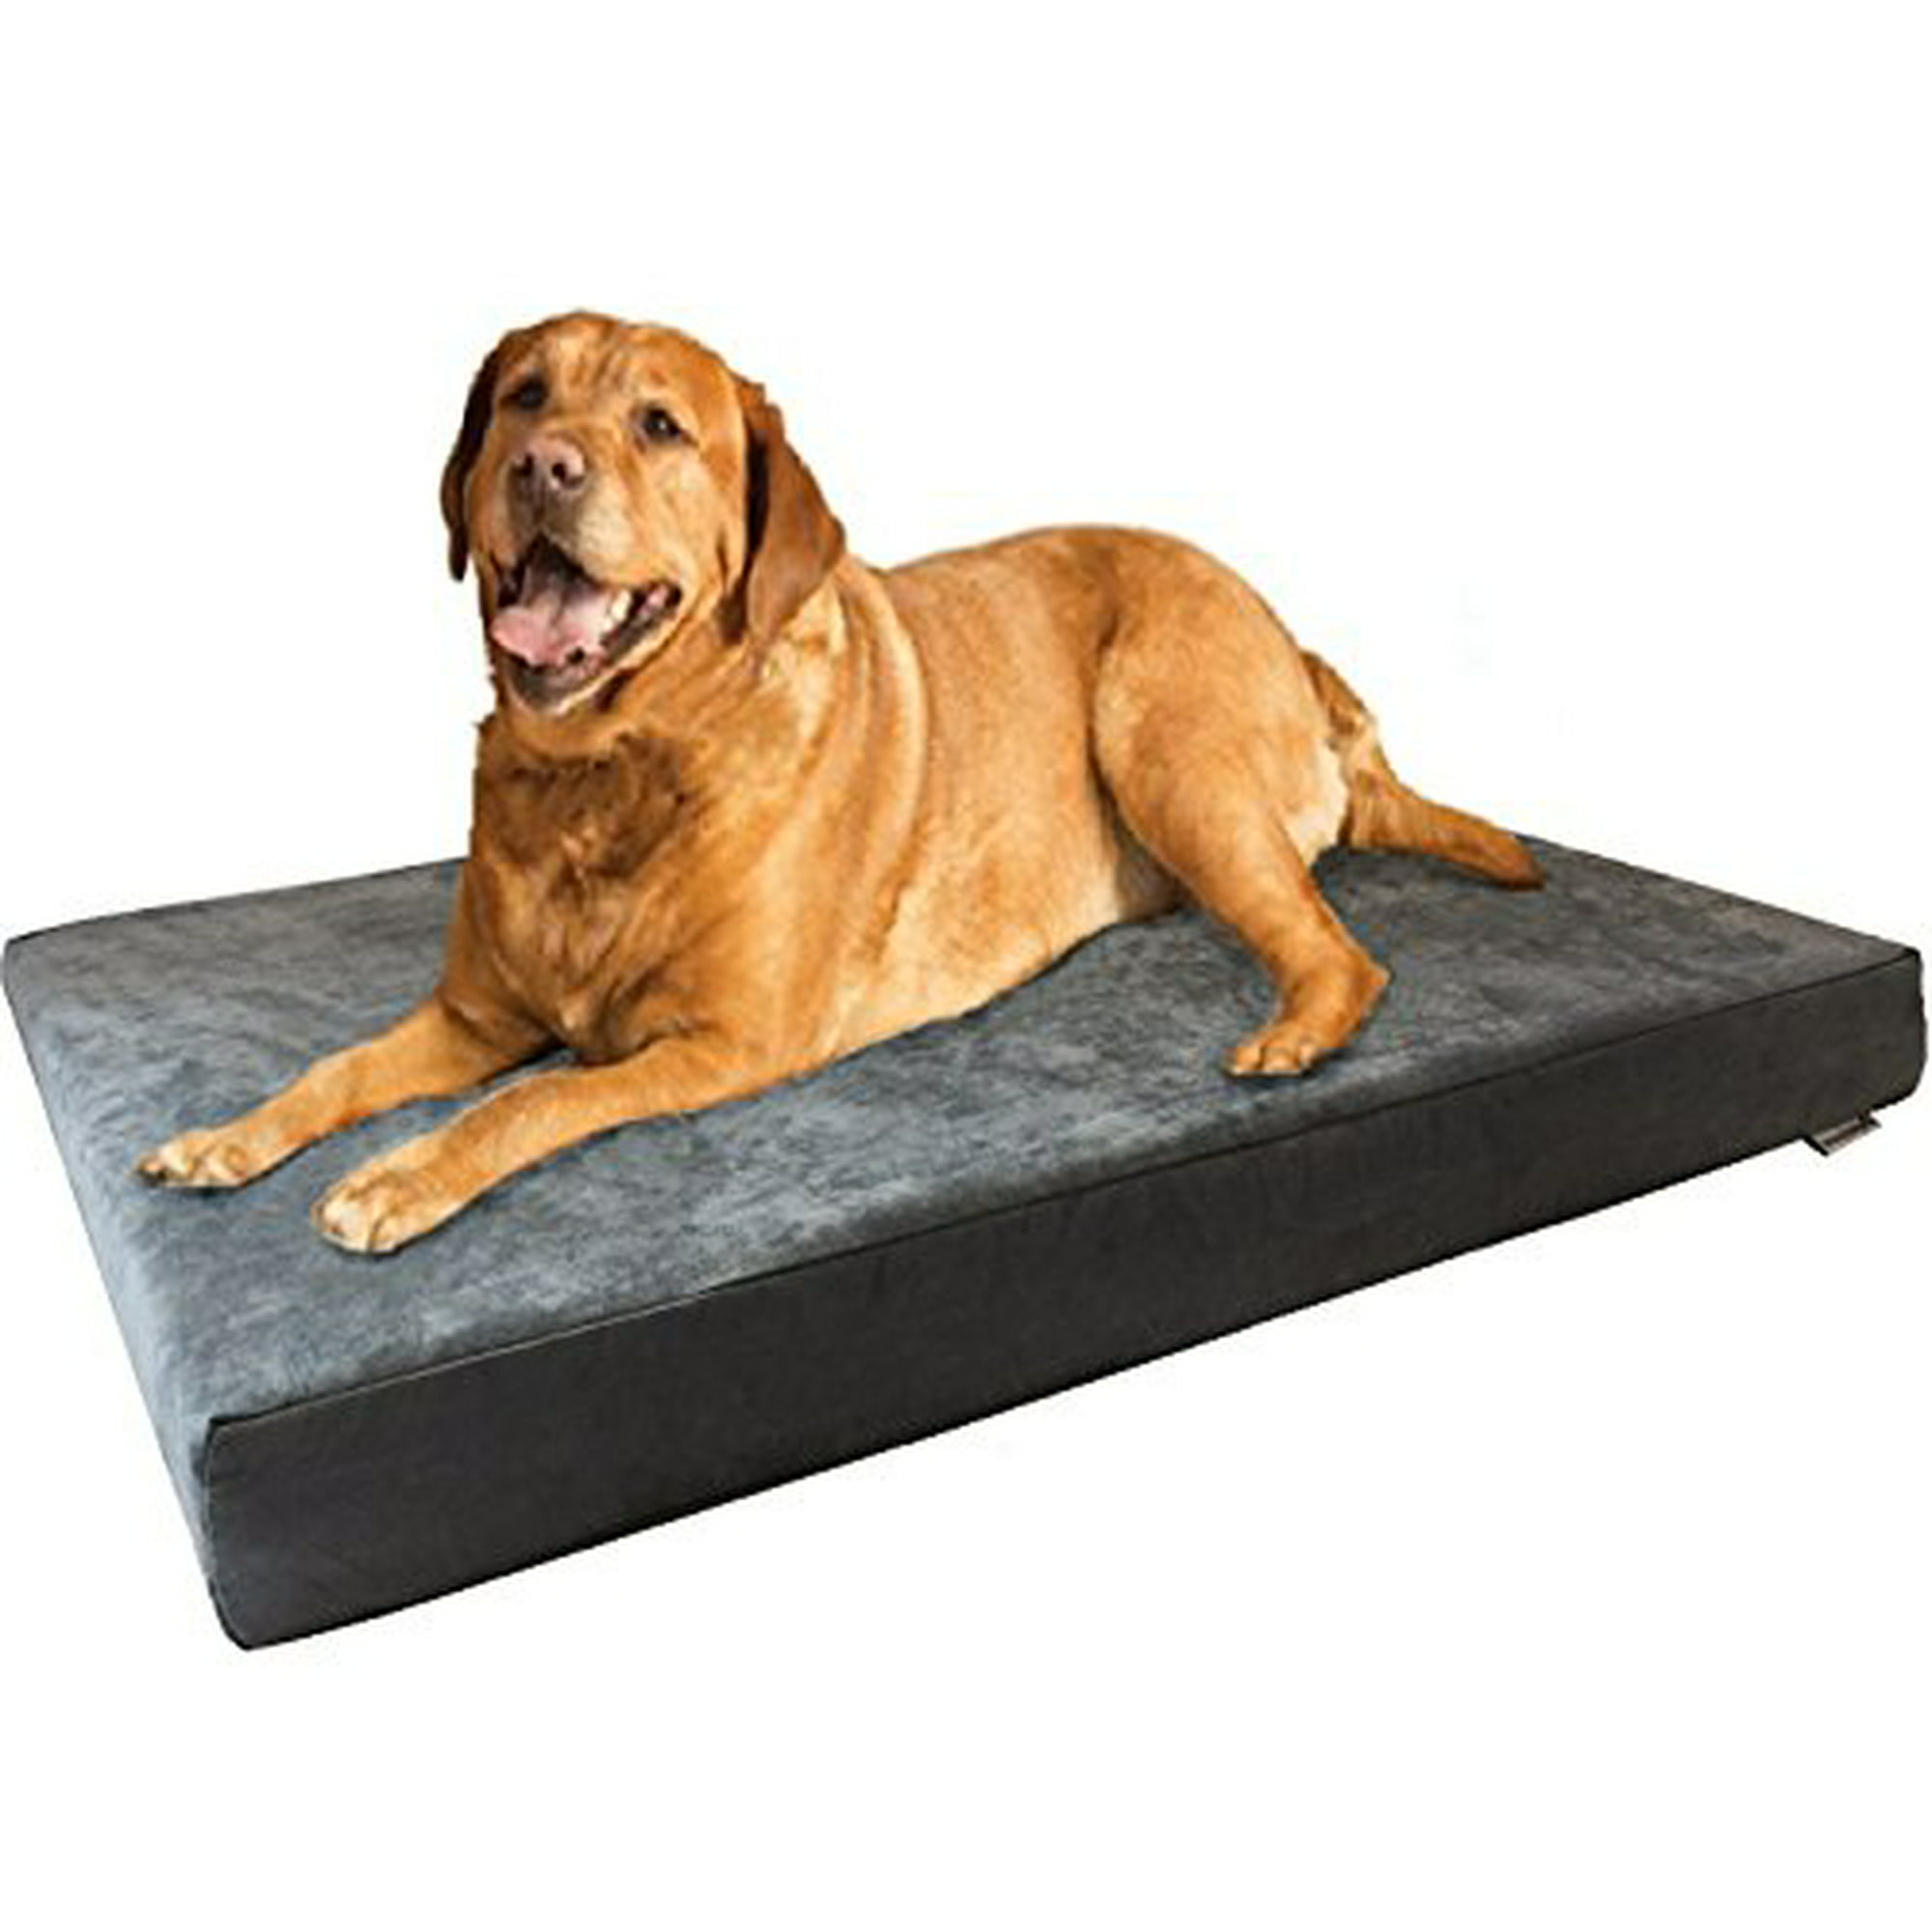 Extra Pet Bed Cover, Best Waterproof Dog Bed Cover